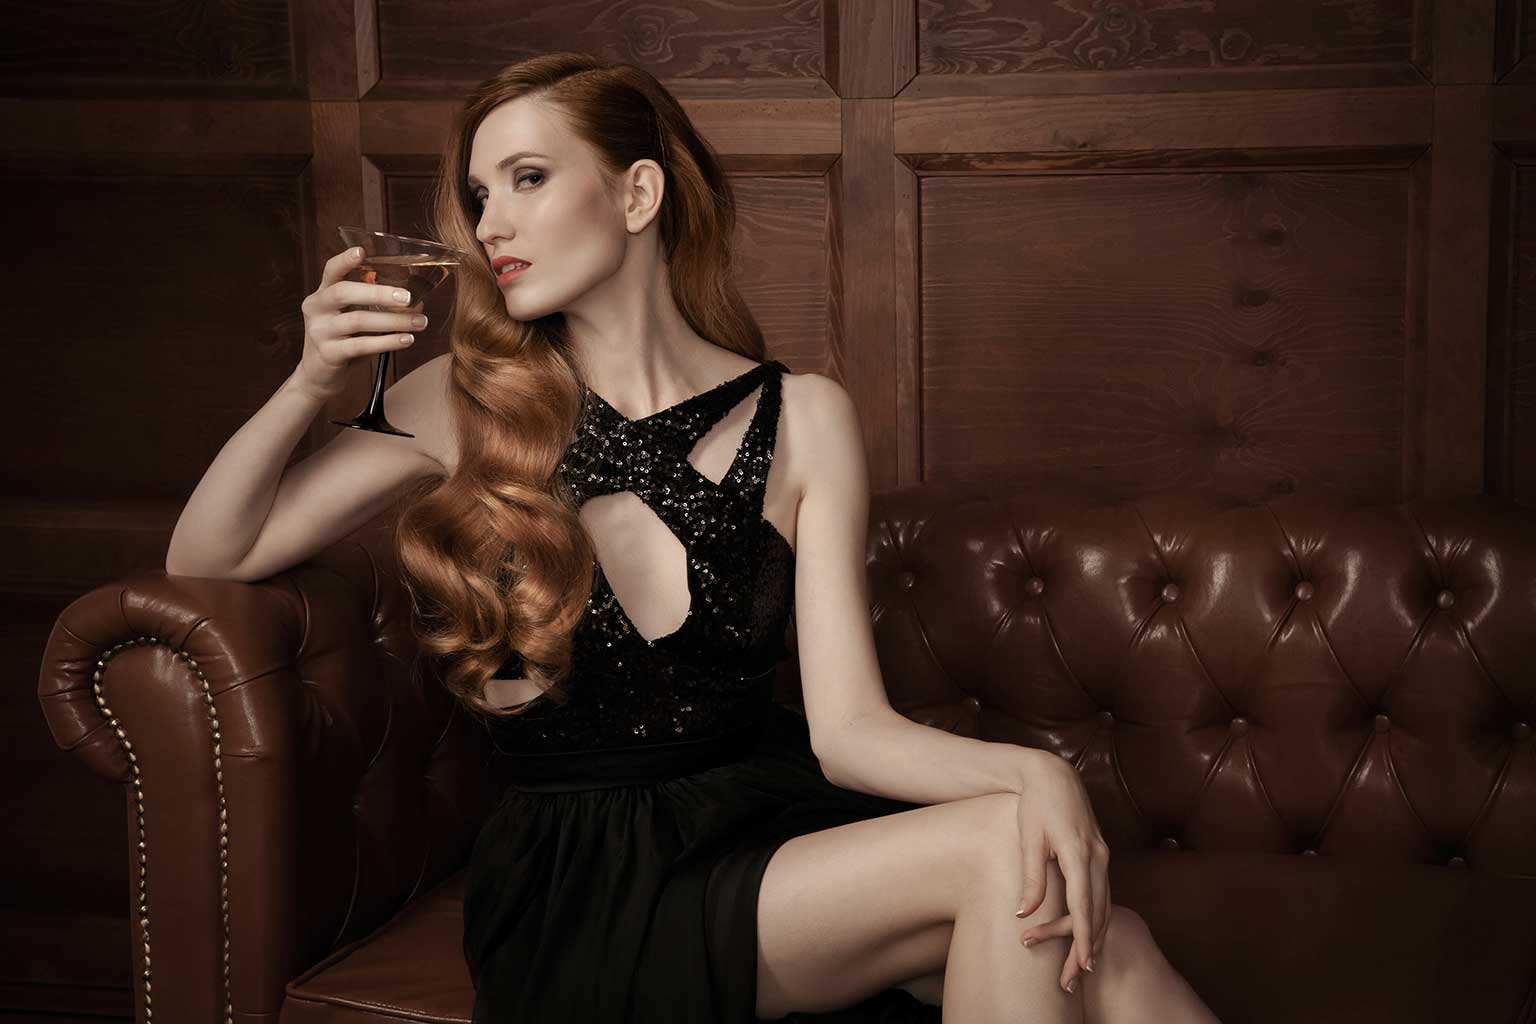 Red Headed Woman Sitting on Leather Couch with a Martini